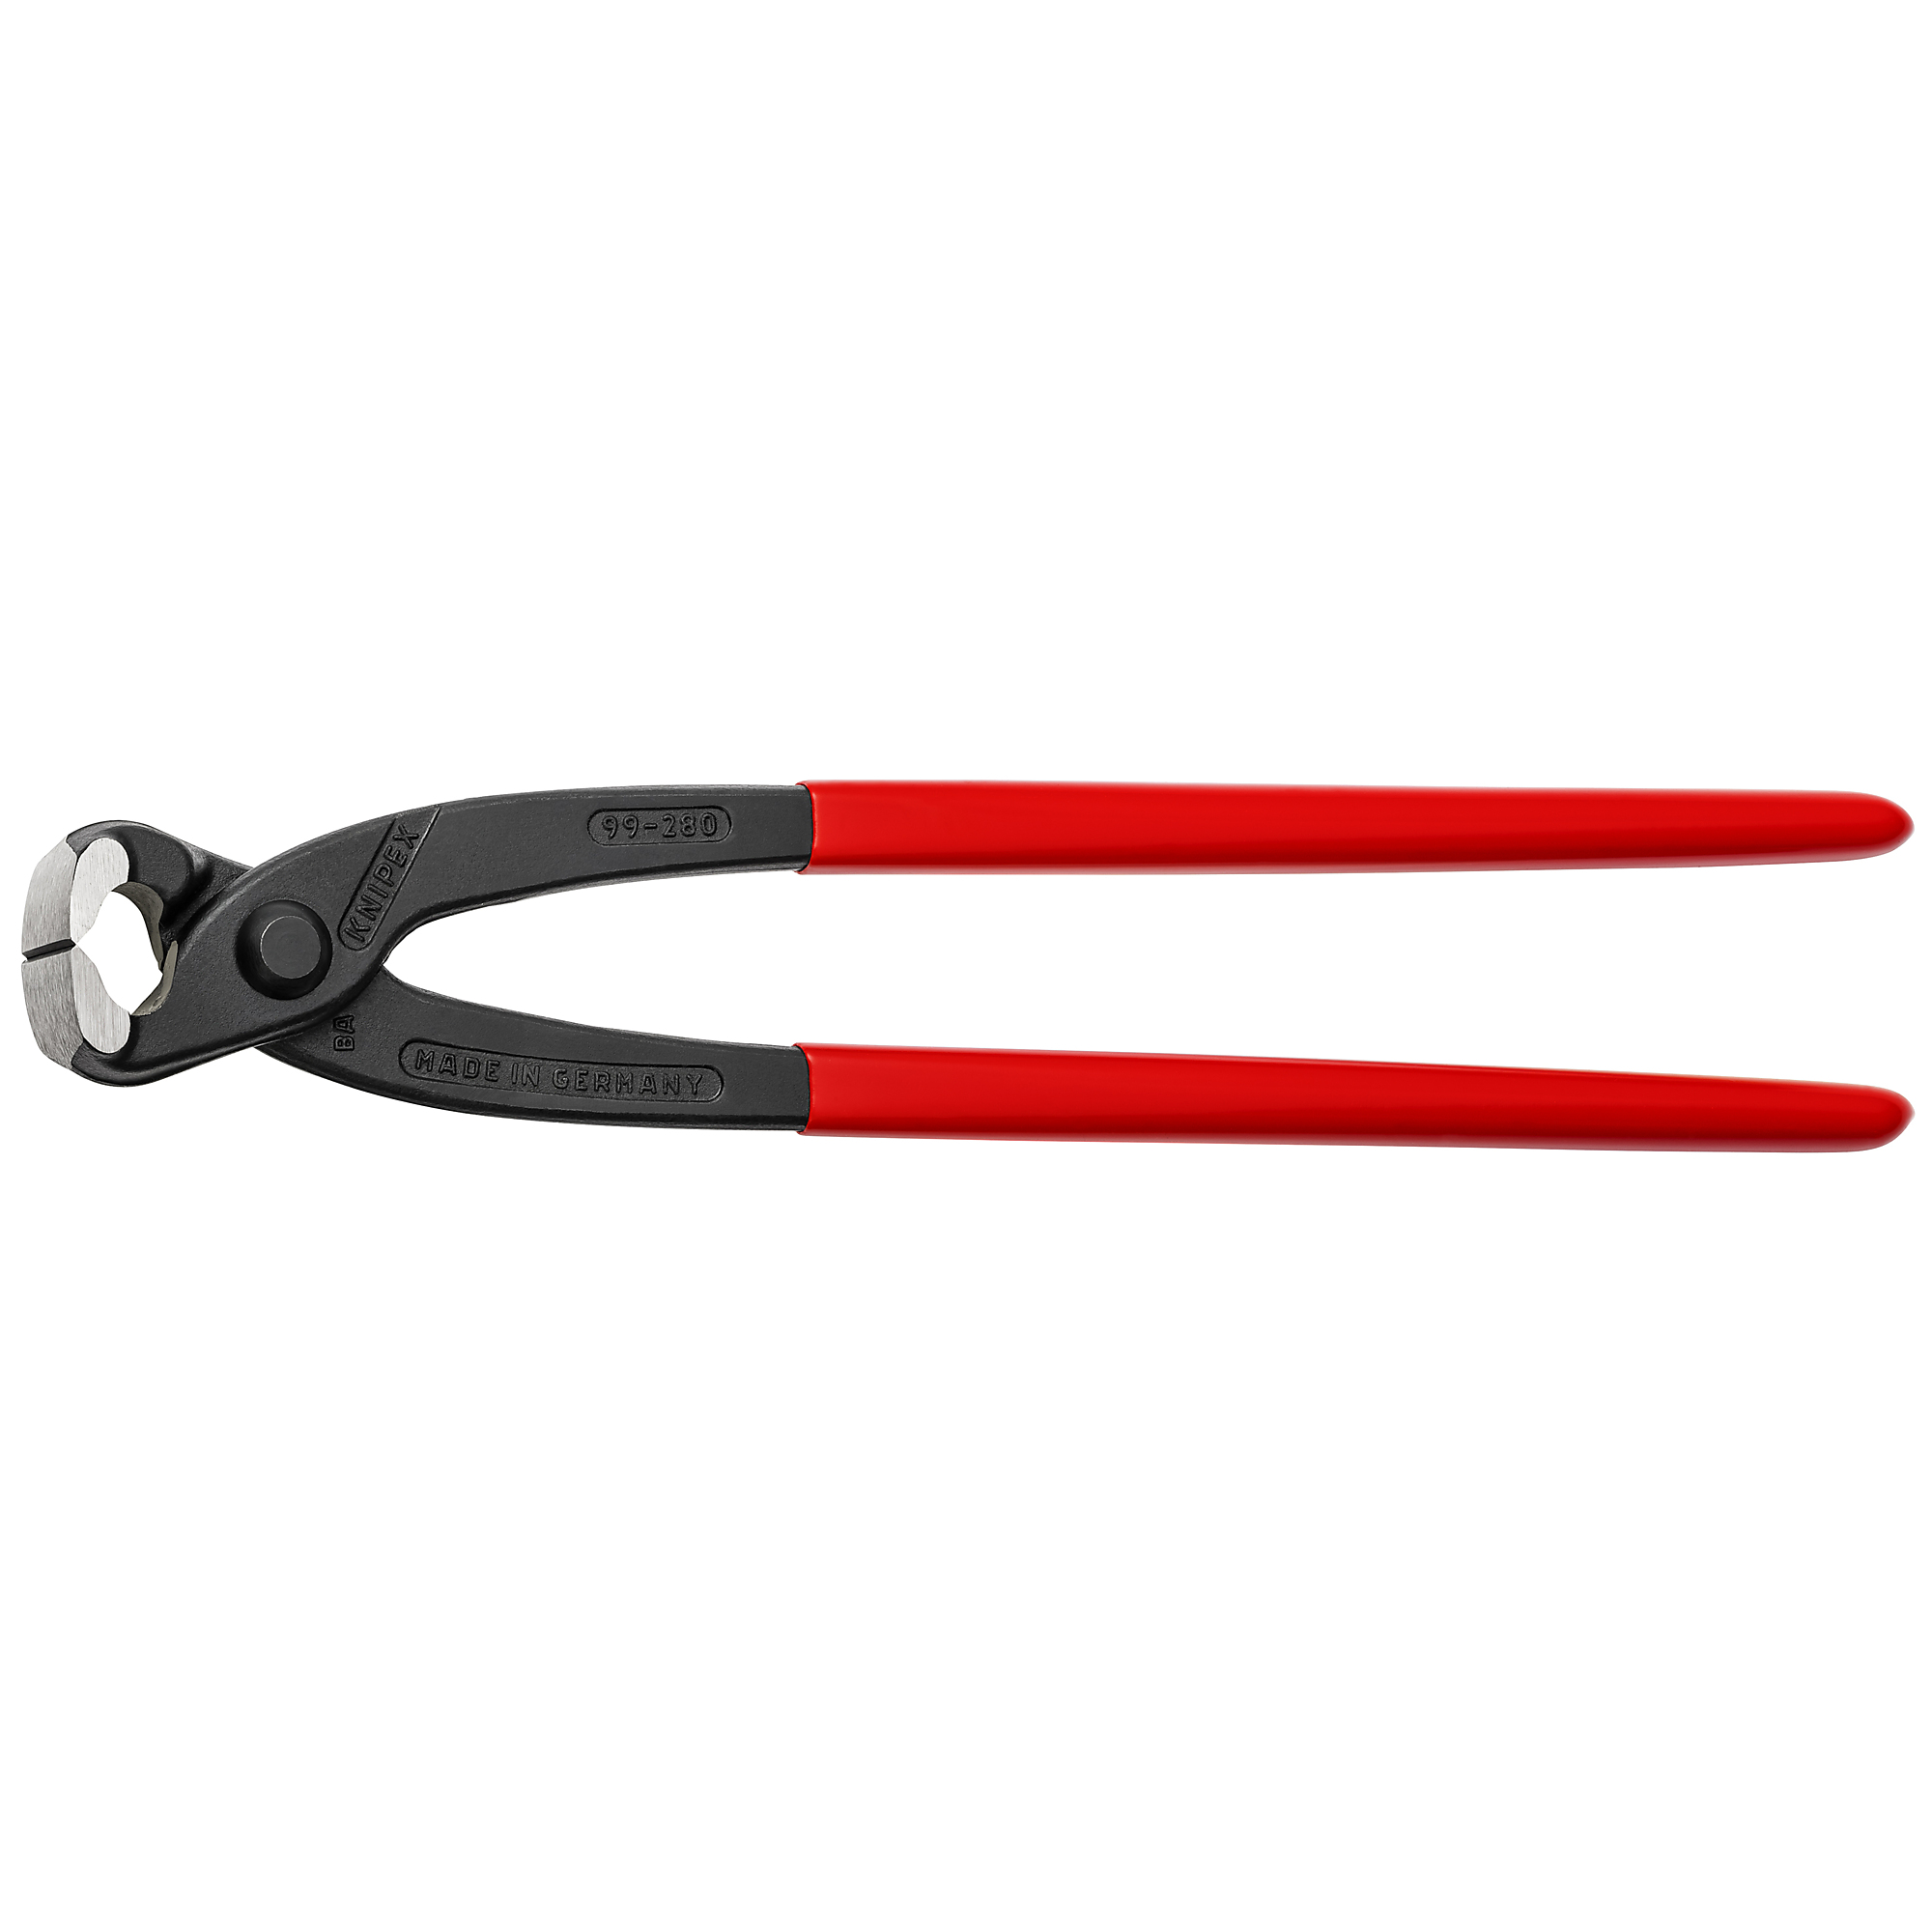 KNIPEX, Concreters' Nippers, Plastic coating, 11Inch, Pieces (qty.) 1 Material Steel, Jaw Capacity 0.109 in, Model 99 01 280